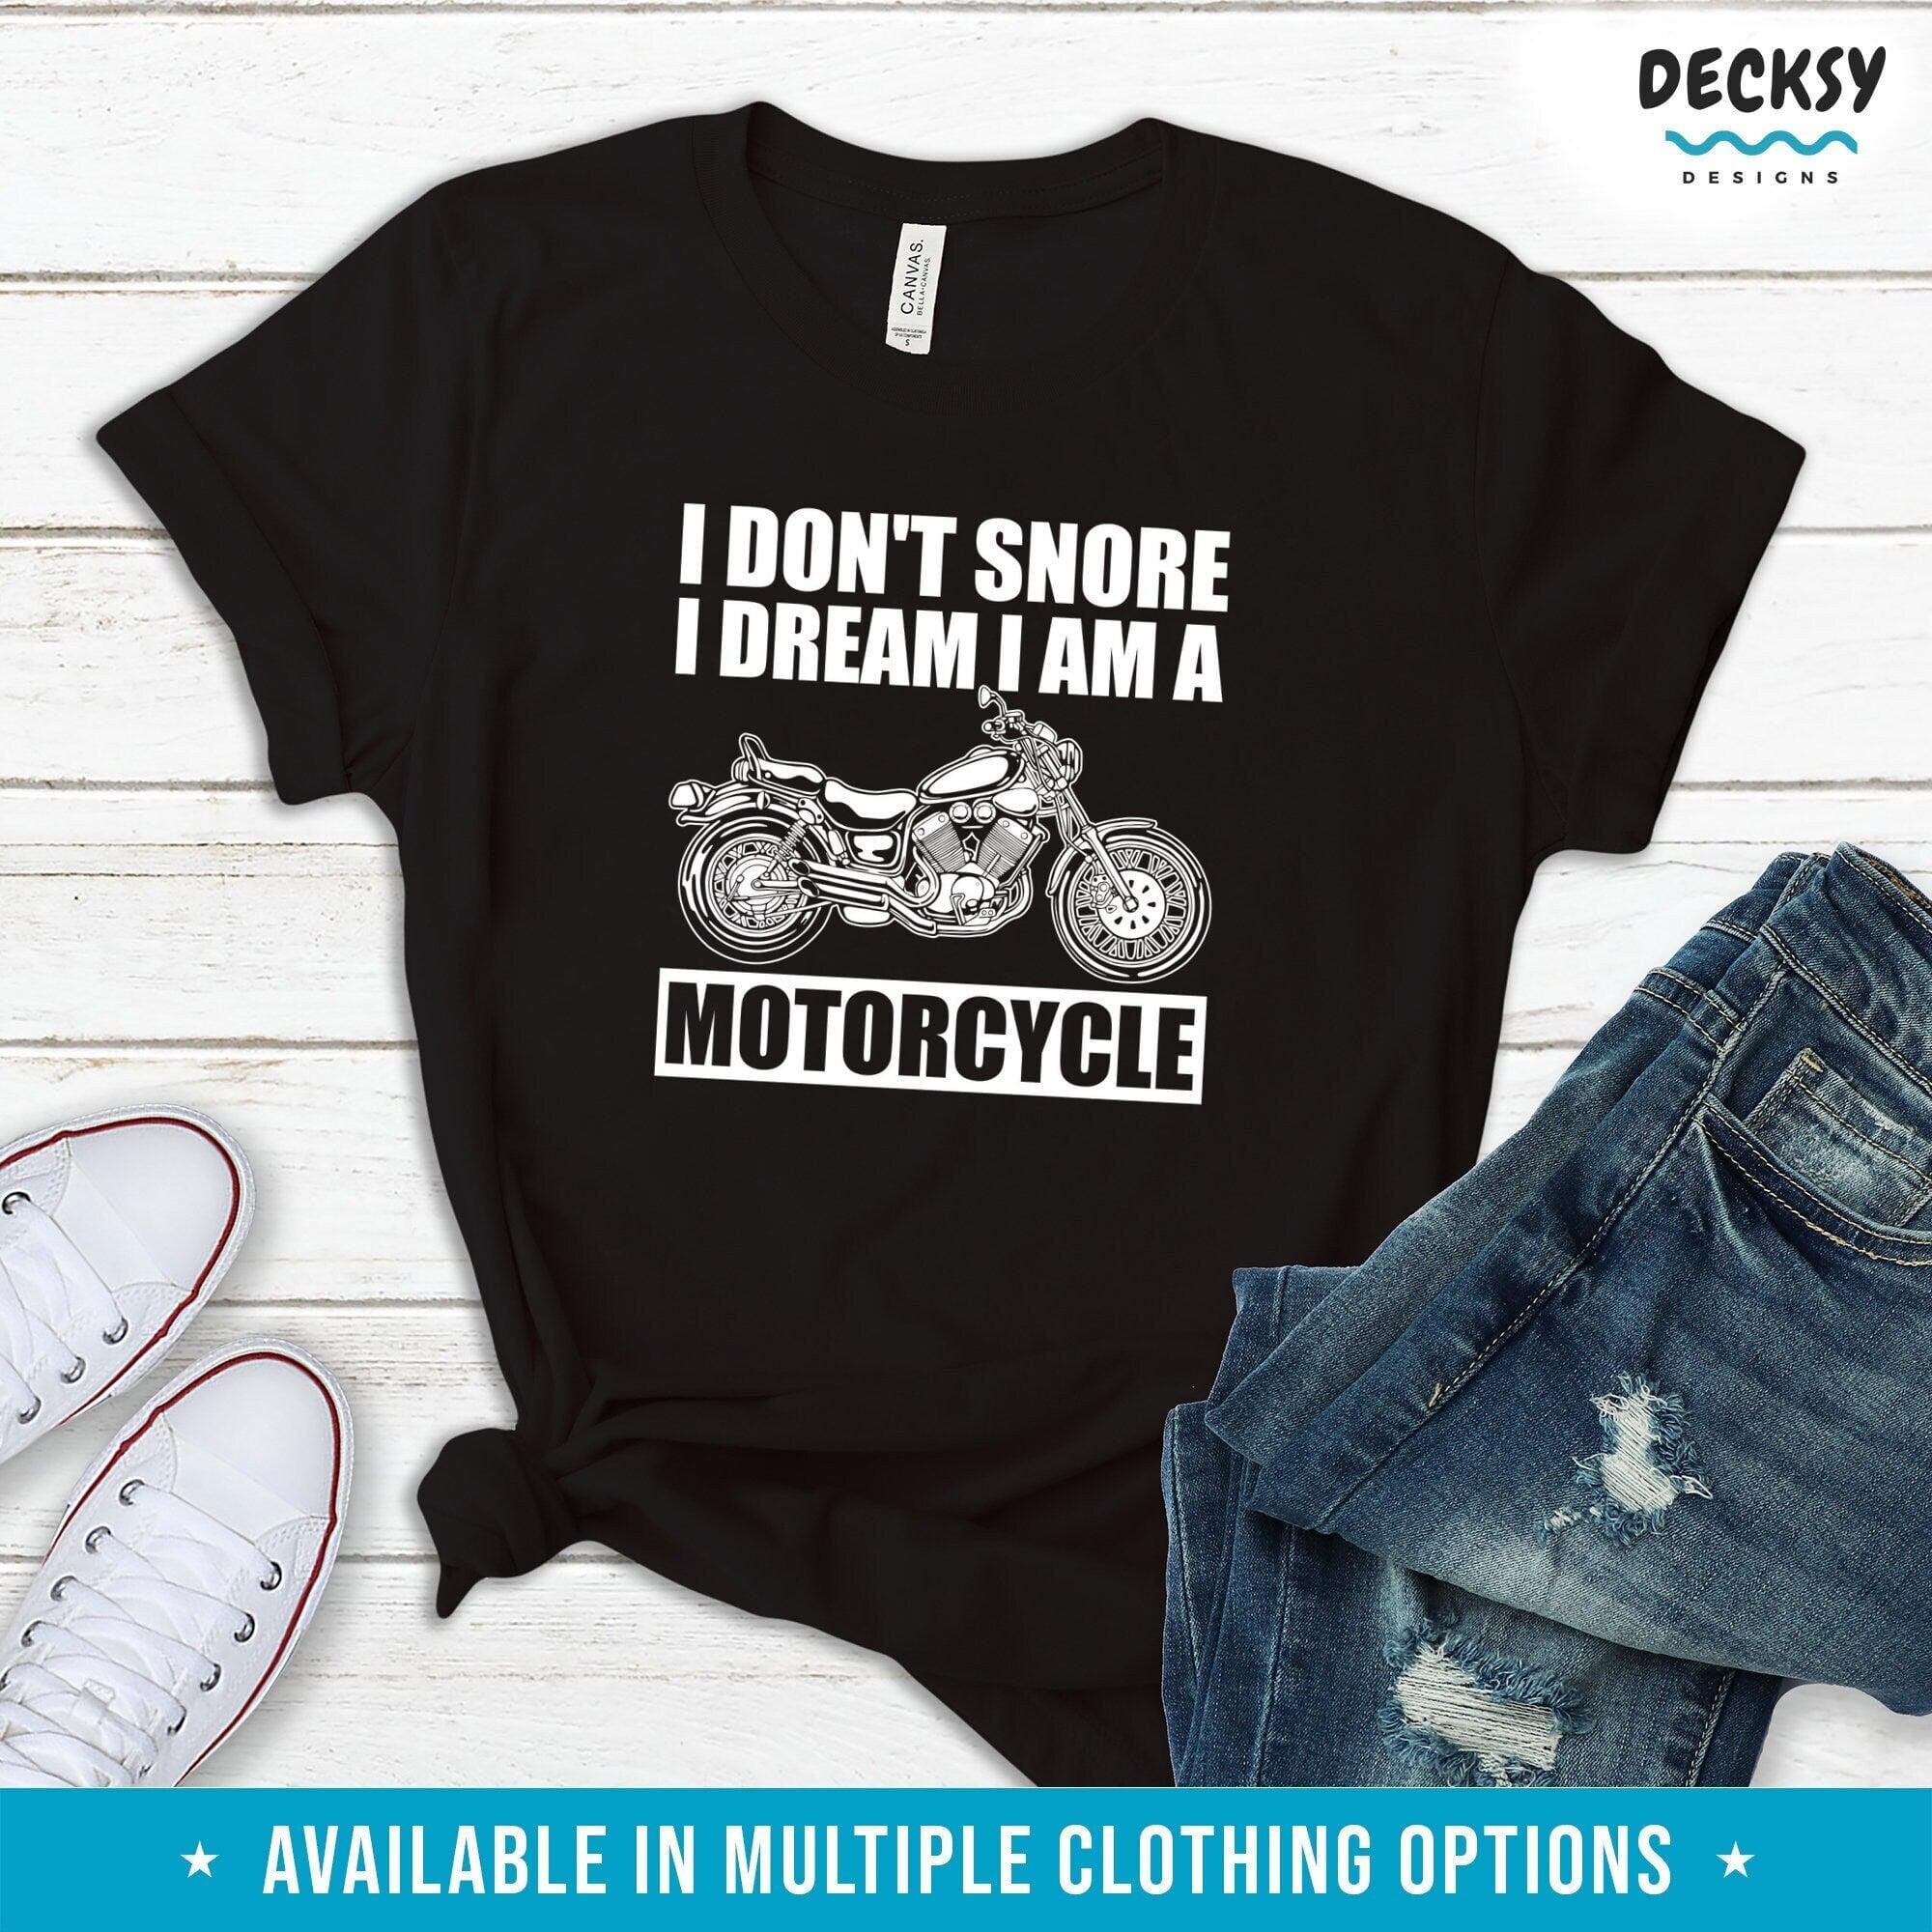 Motorcycle Tshirt, Biker Gift-Clothing:Gender-Neutral Adult Clothing:Tops & Tees:T-shirts:Graphic Tees-DecksyDesigns